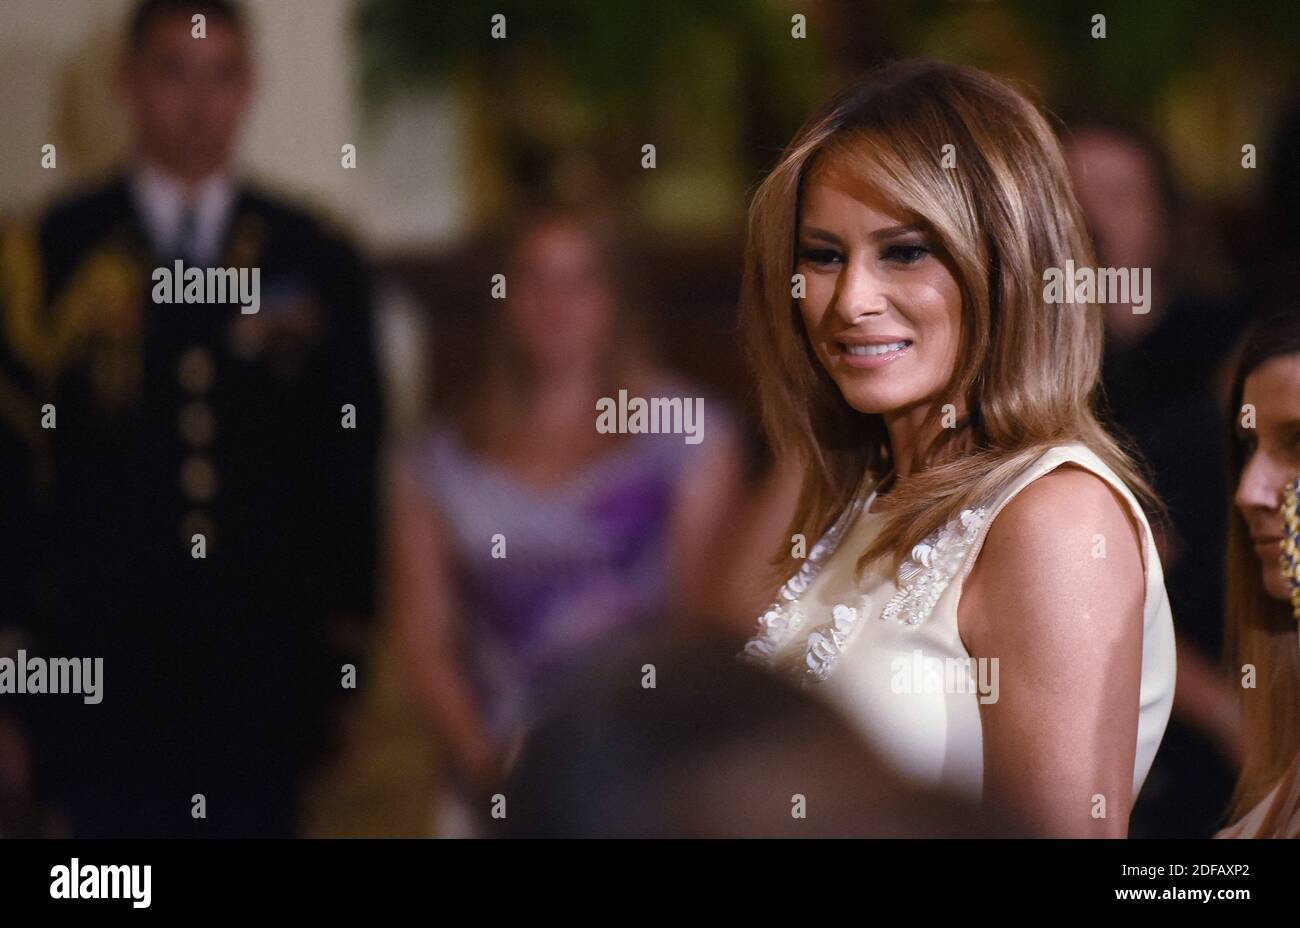 File photo - First lady Melania Trump smiles during a ceremony honoring the military mothers in the East Room of the White House in Washington, D.C., on May 10, 2019. A new, scrupulously reported biography by Washington Post reporter Mary Jordan argues that the first lady is not a pawn but a player, an accessory in the second as much as the first sense, and a woman able to get what she wants from one of the most powerful and transparently vain men in the world. The book is called The Art of Her Deal. Photo by Olivier Douliery/ABACAPRESS.COM Stock Photo